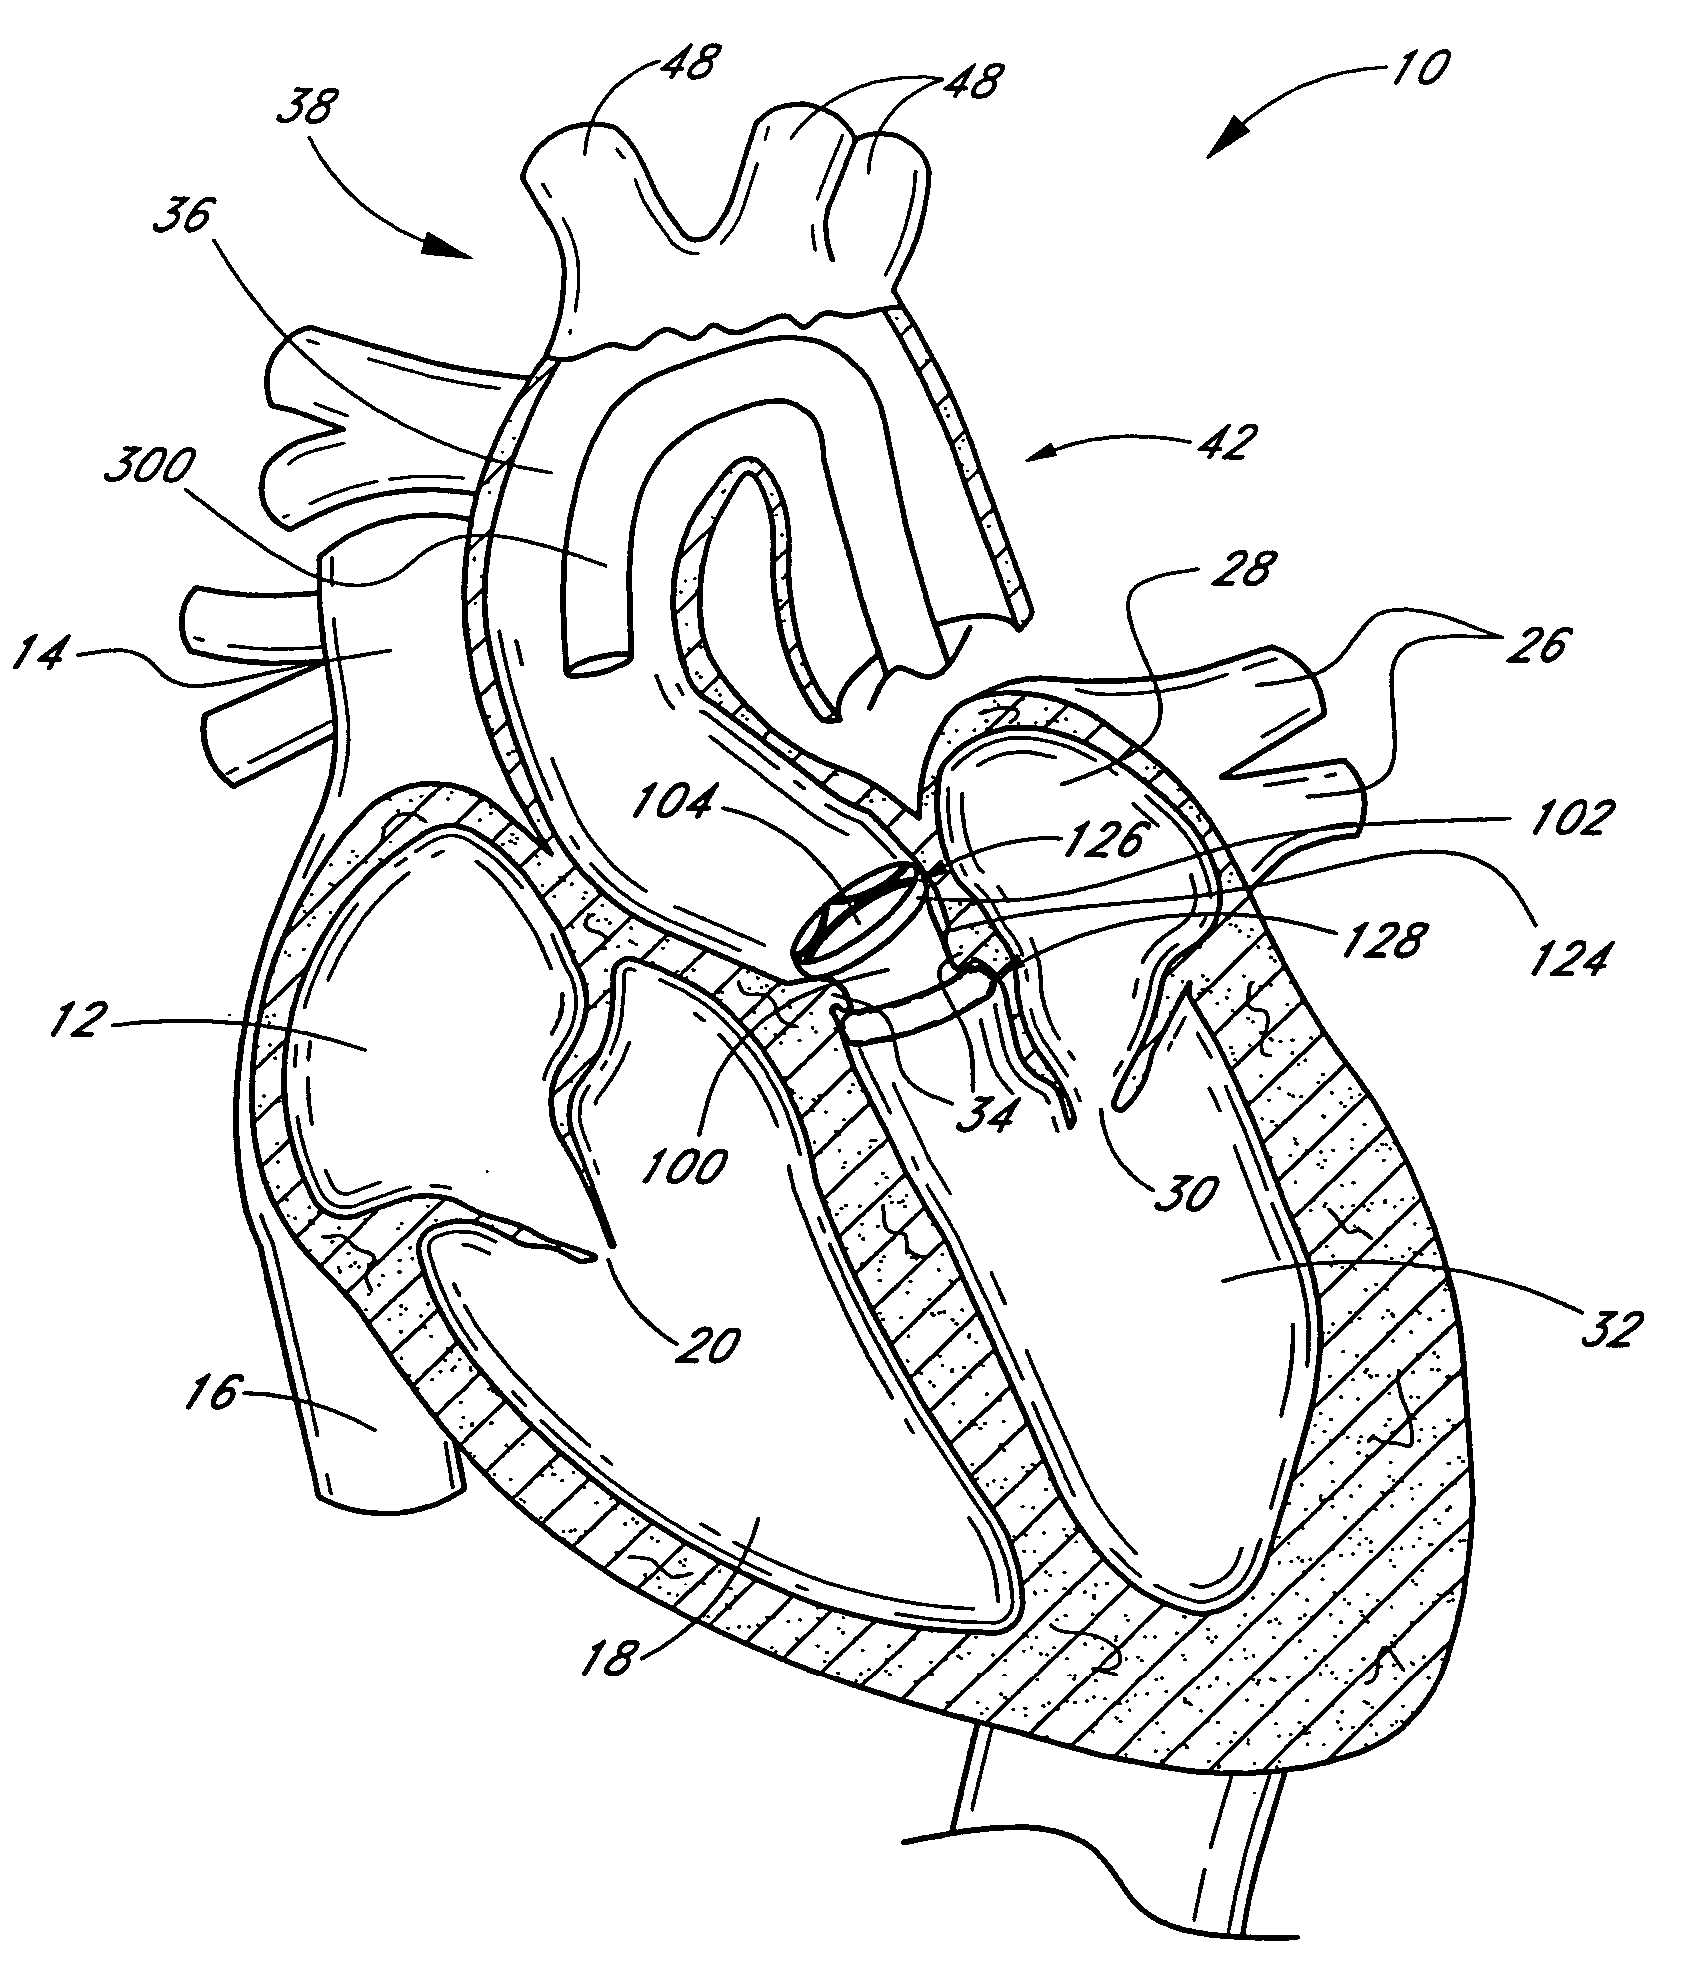 Methods of cardiac valve replacement using nonstented prosthetic valve